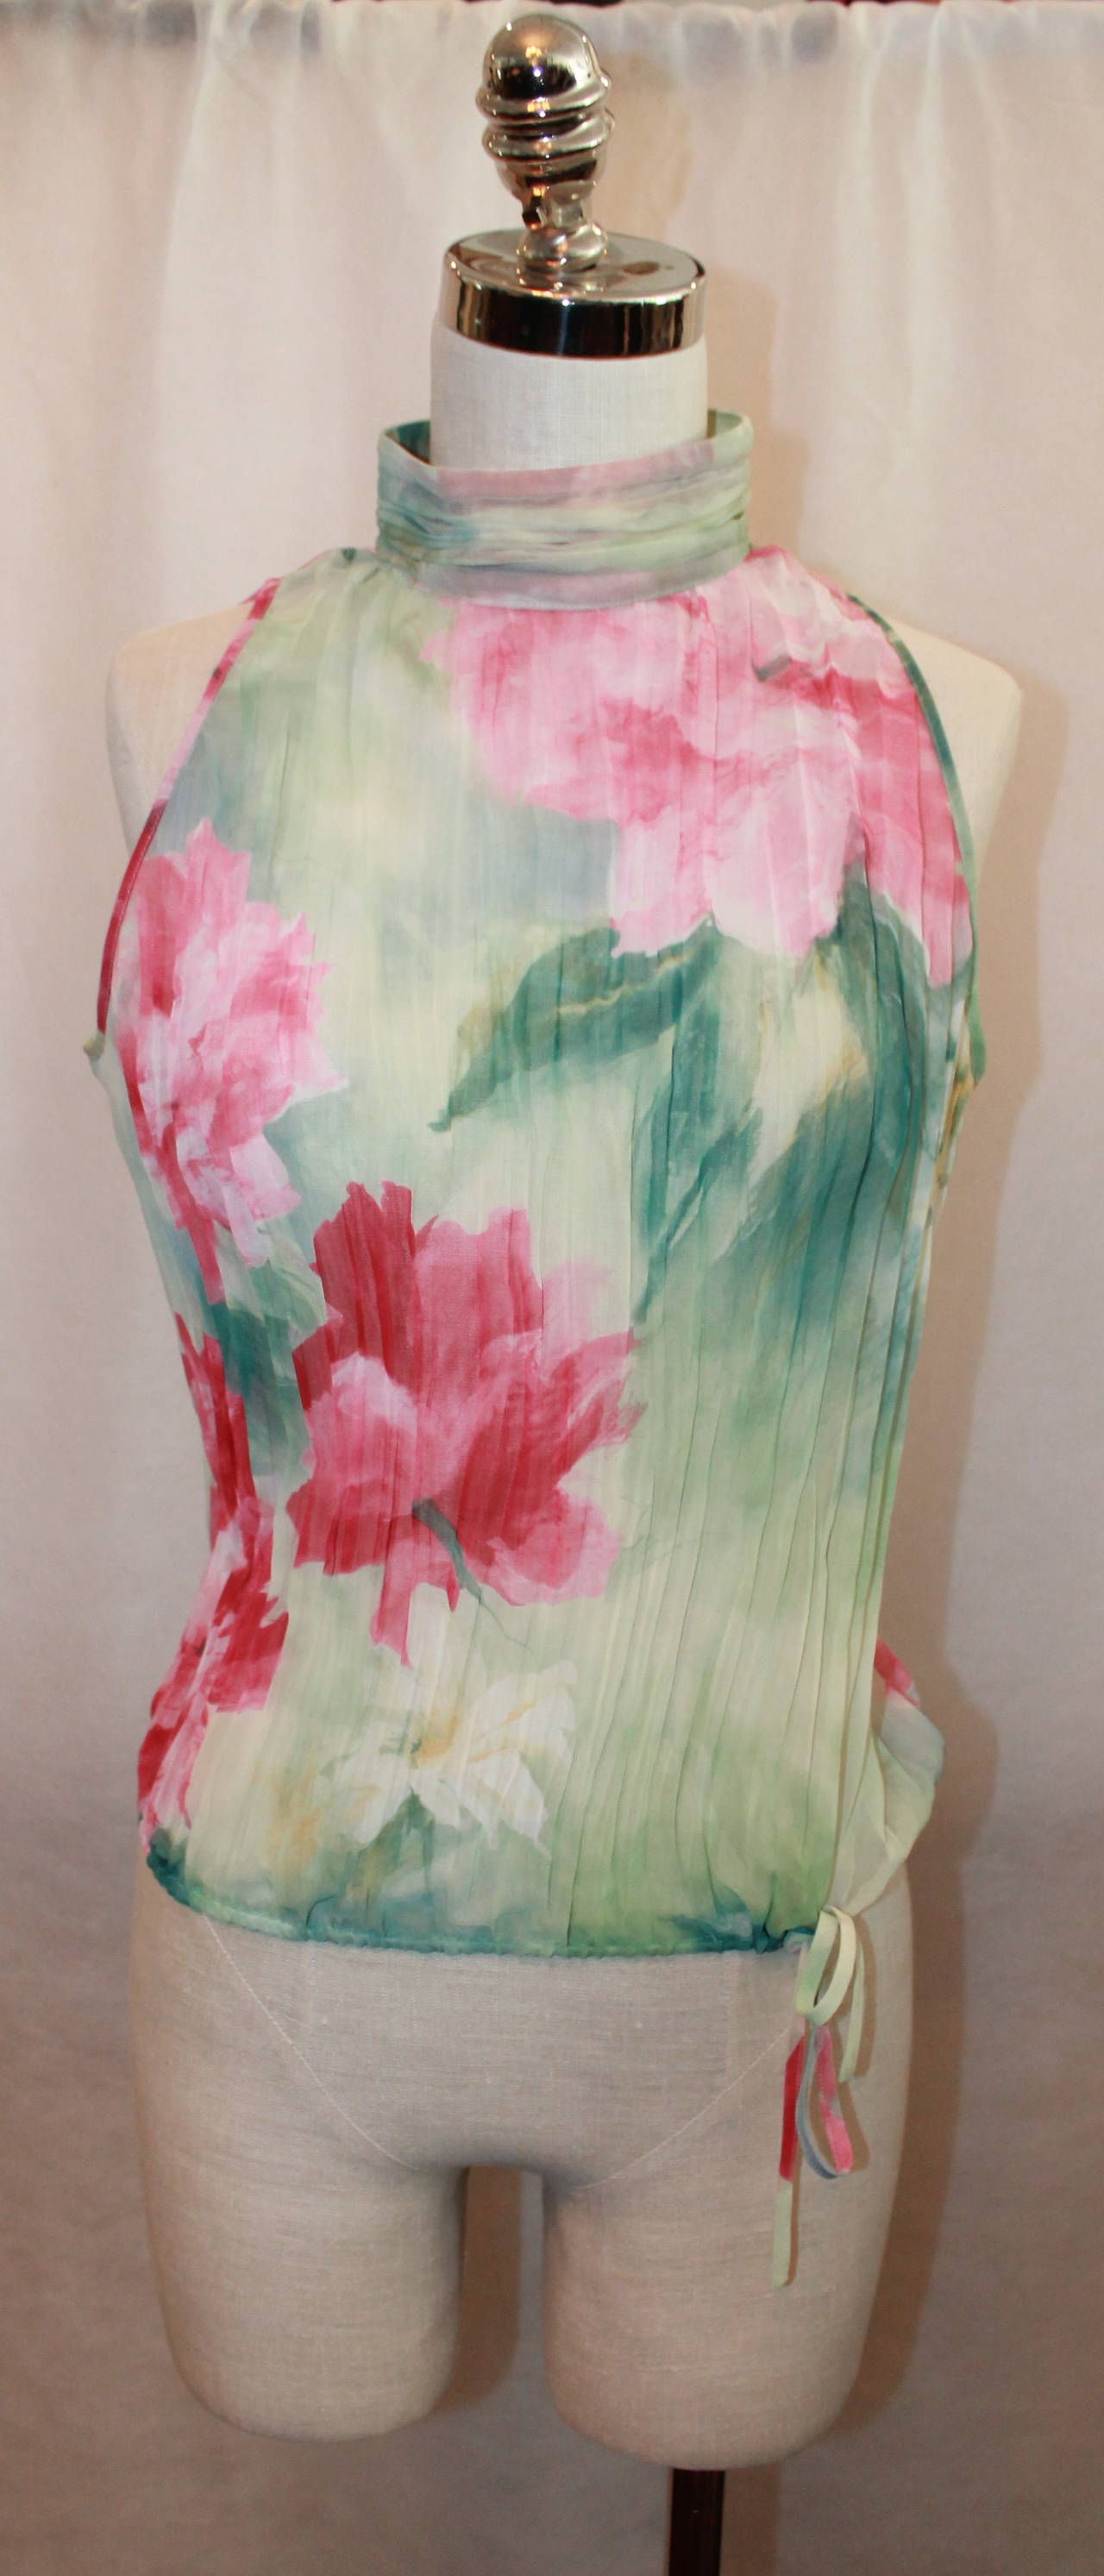 Escada Green and Pink Multi Floral Print Halter Top with Turtleneck and Drawstring Bottom in Excellent Condition. Size 38.

Fabric: 100 % Polyester

Measurements:
Bust: up to 44 